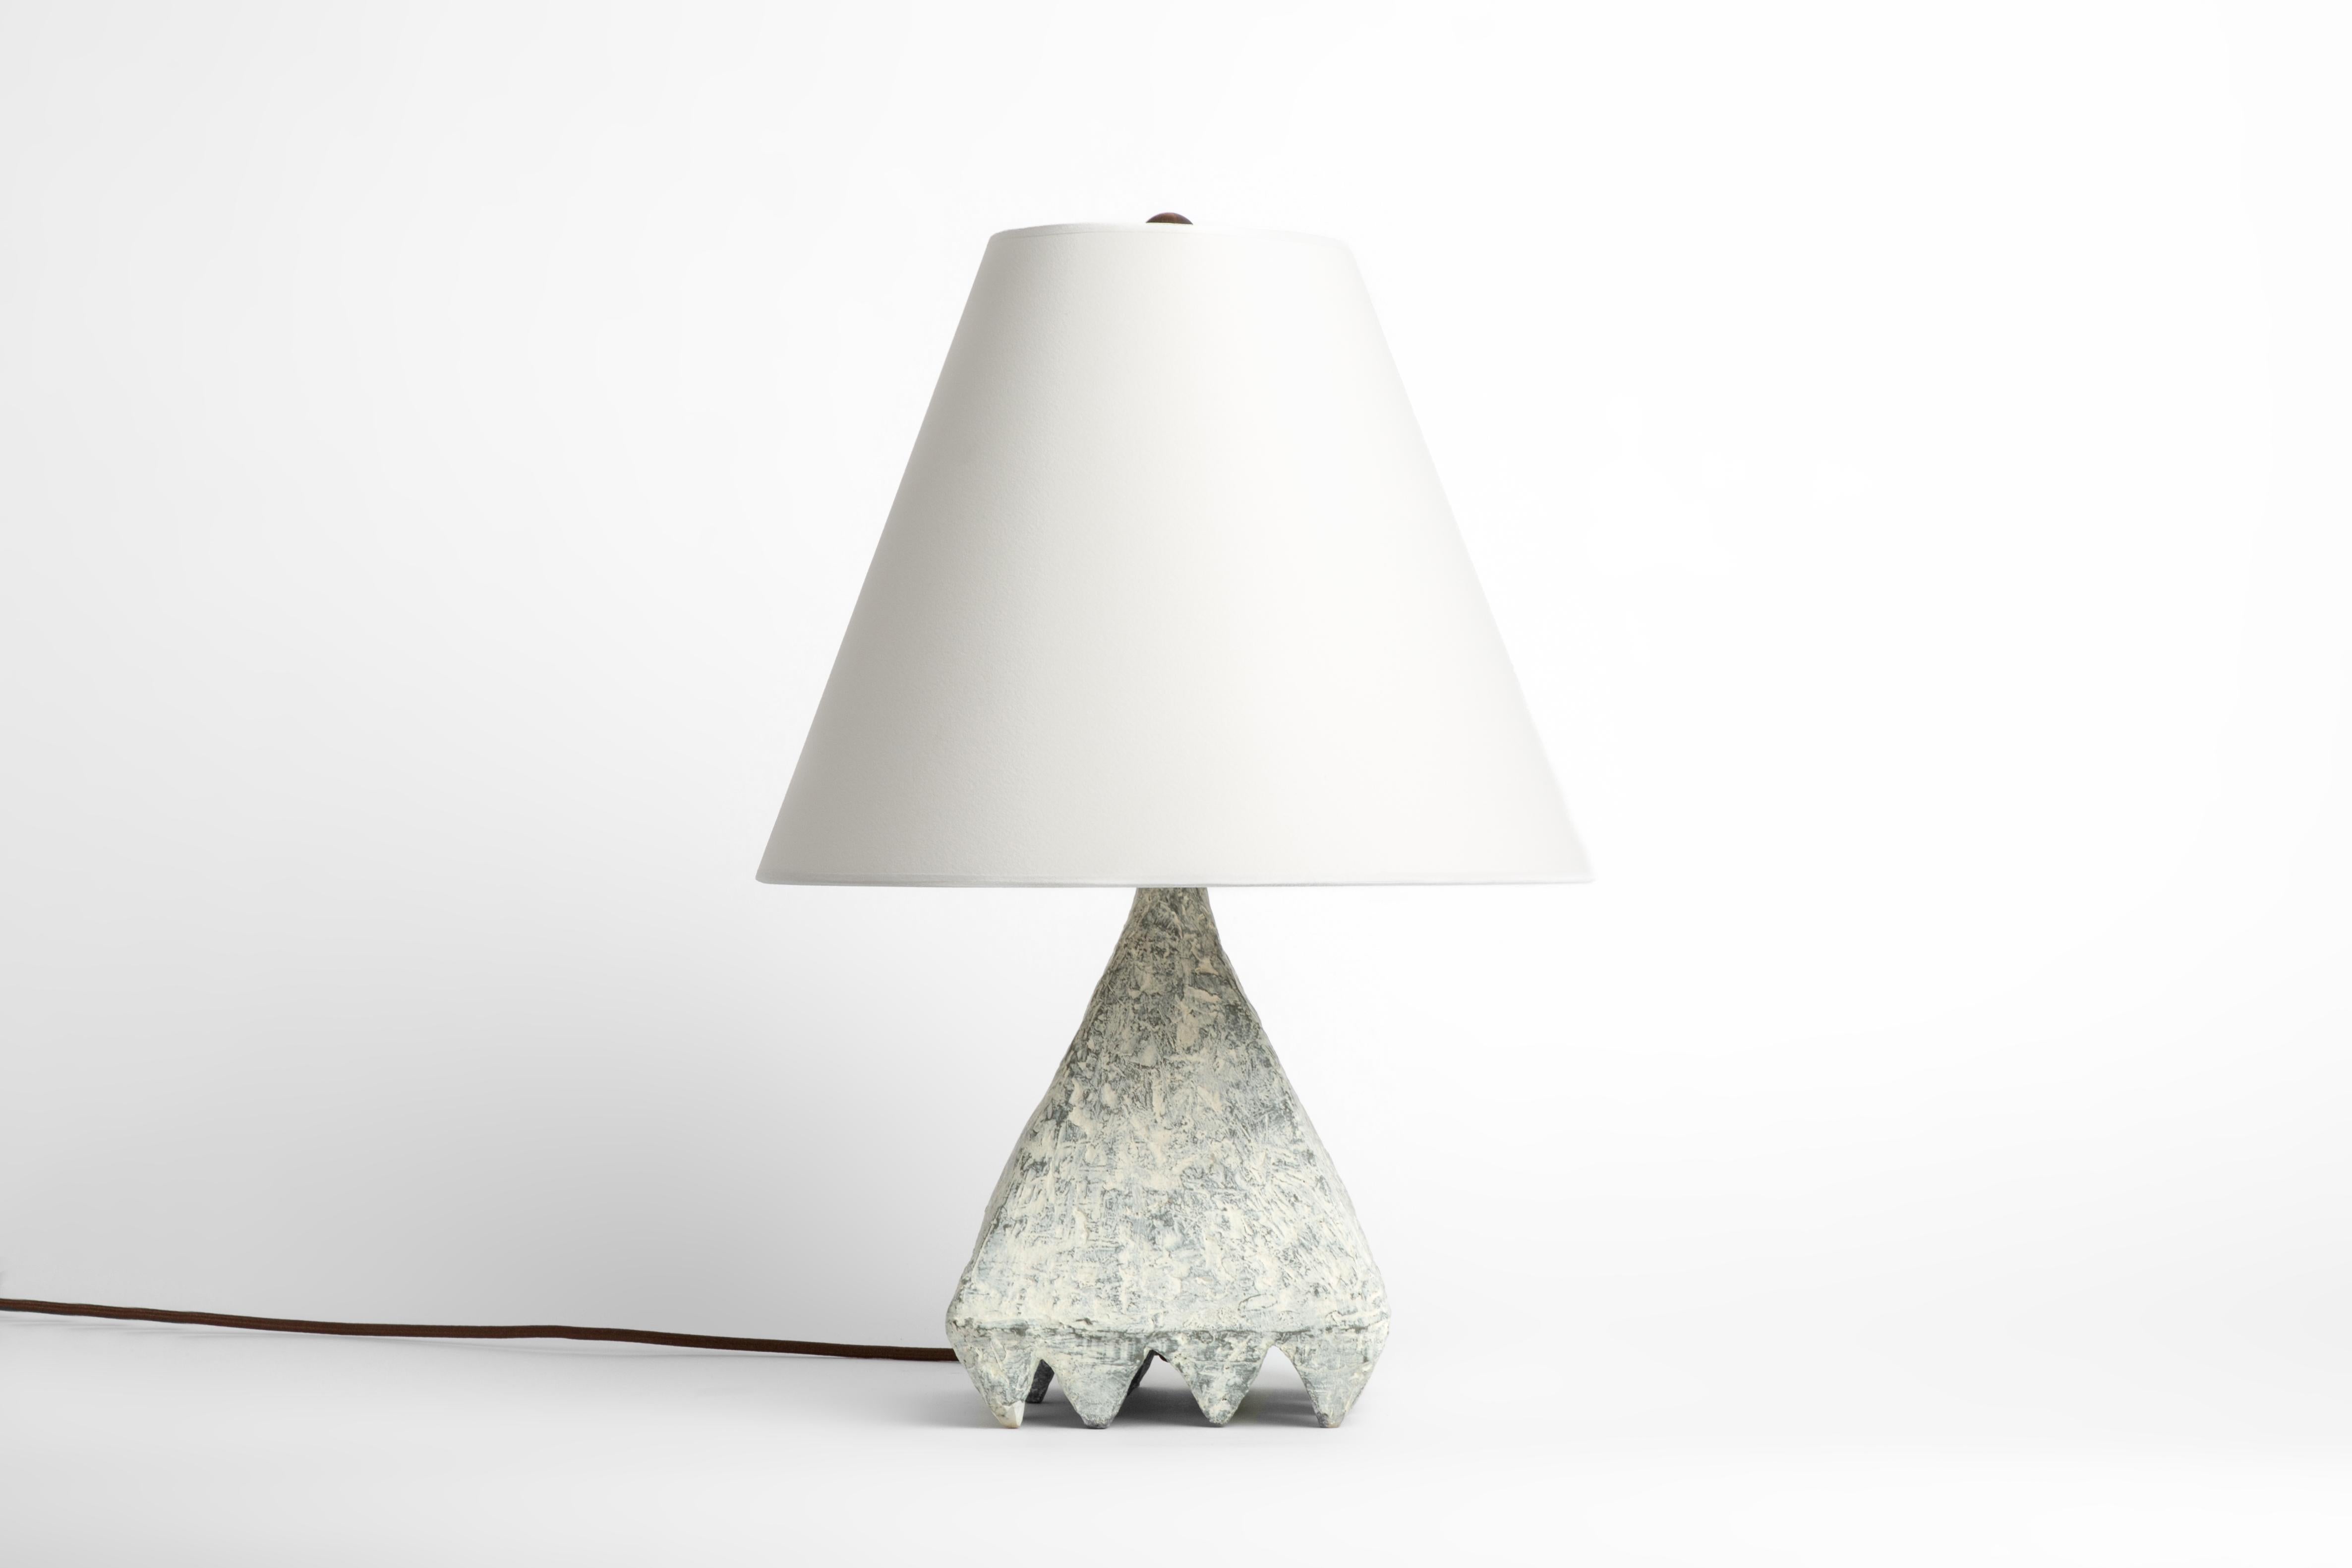 Hand-Crafted Cast Resin Cubetto Table Lamp, Kacper Dolatowski